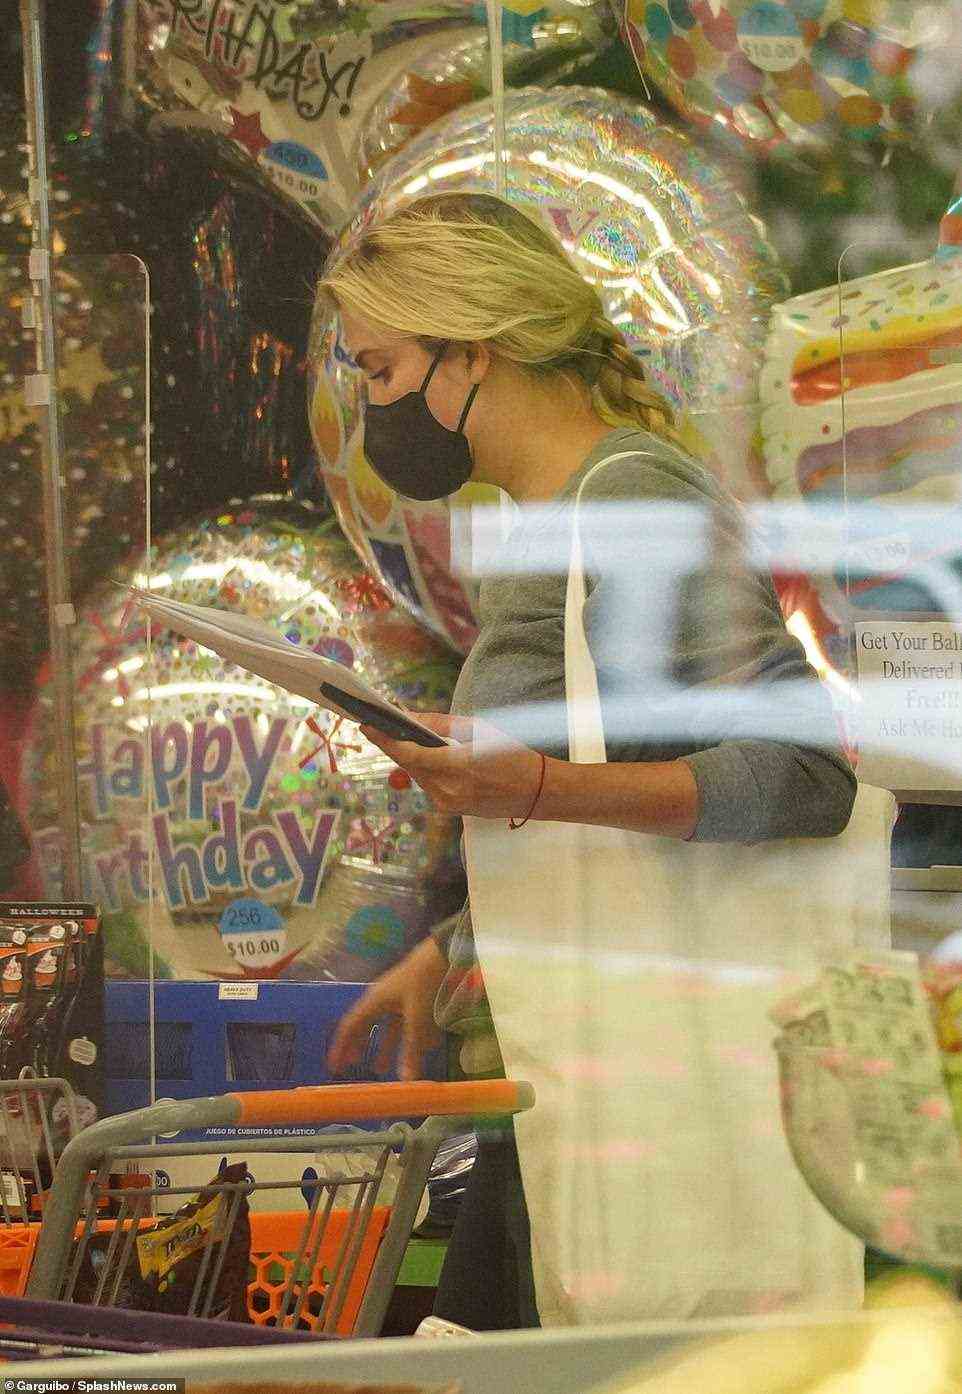 Ivanka was pictured pulling the cart up to checkout to pay for their purchases